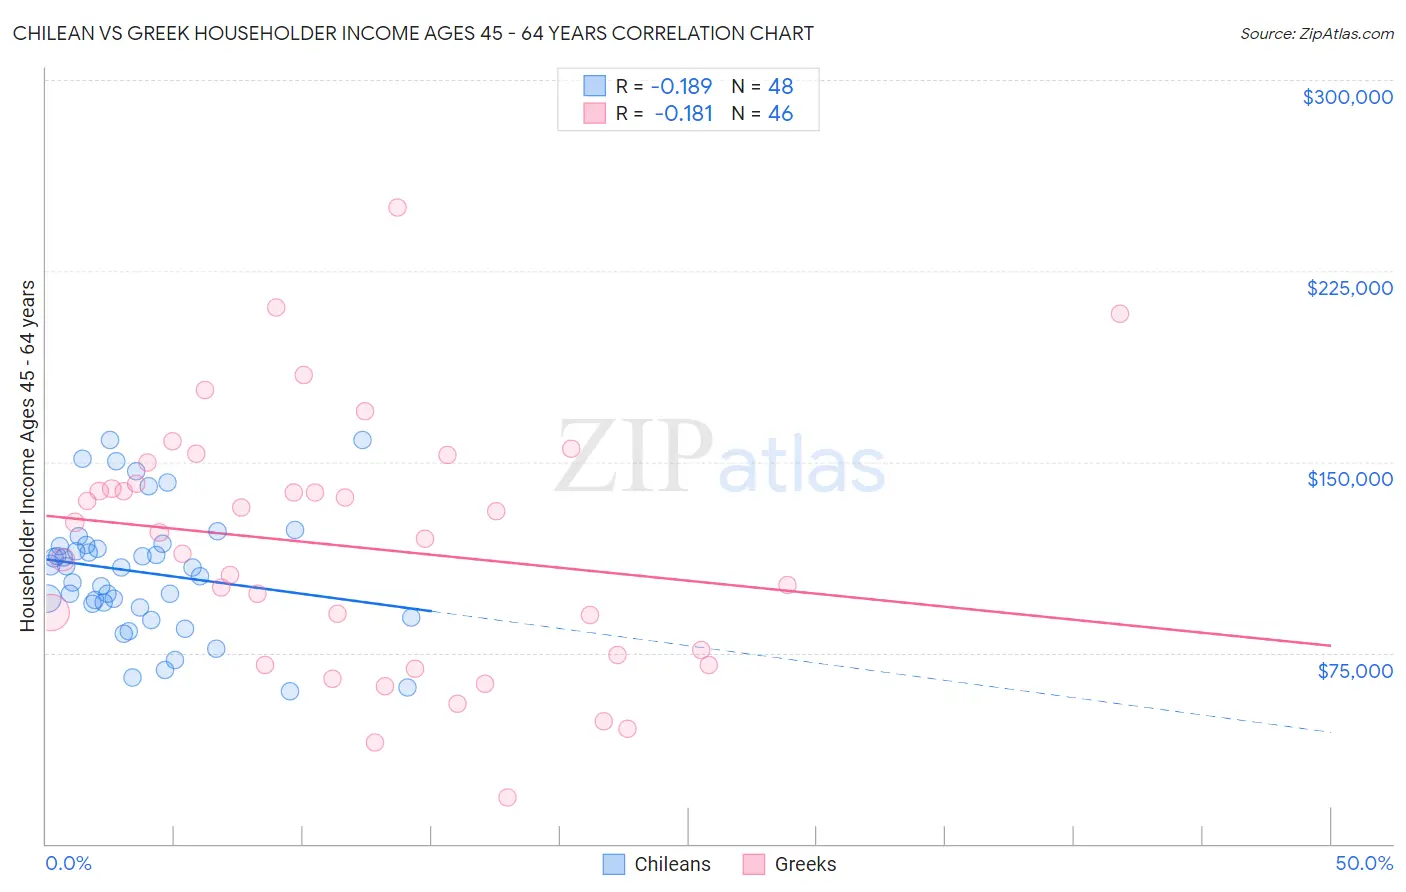 Chilean vs Greek Householder Income Ages 45 - 64 years